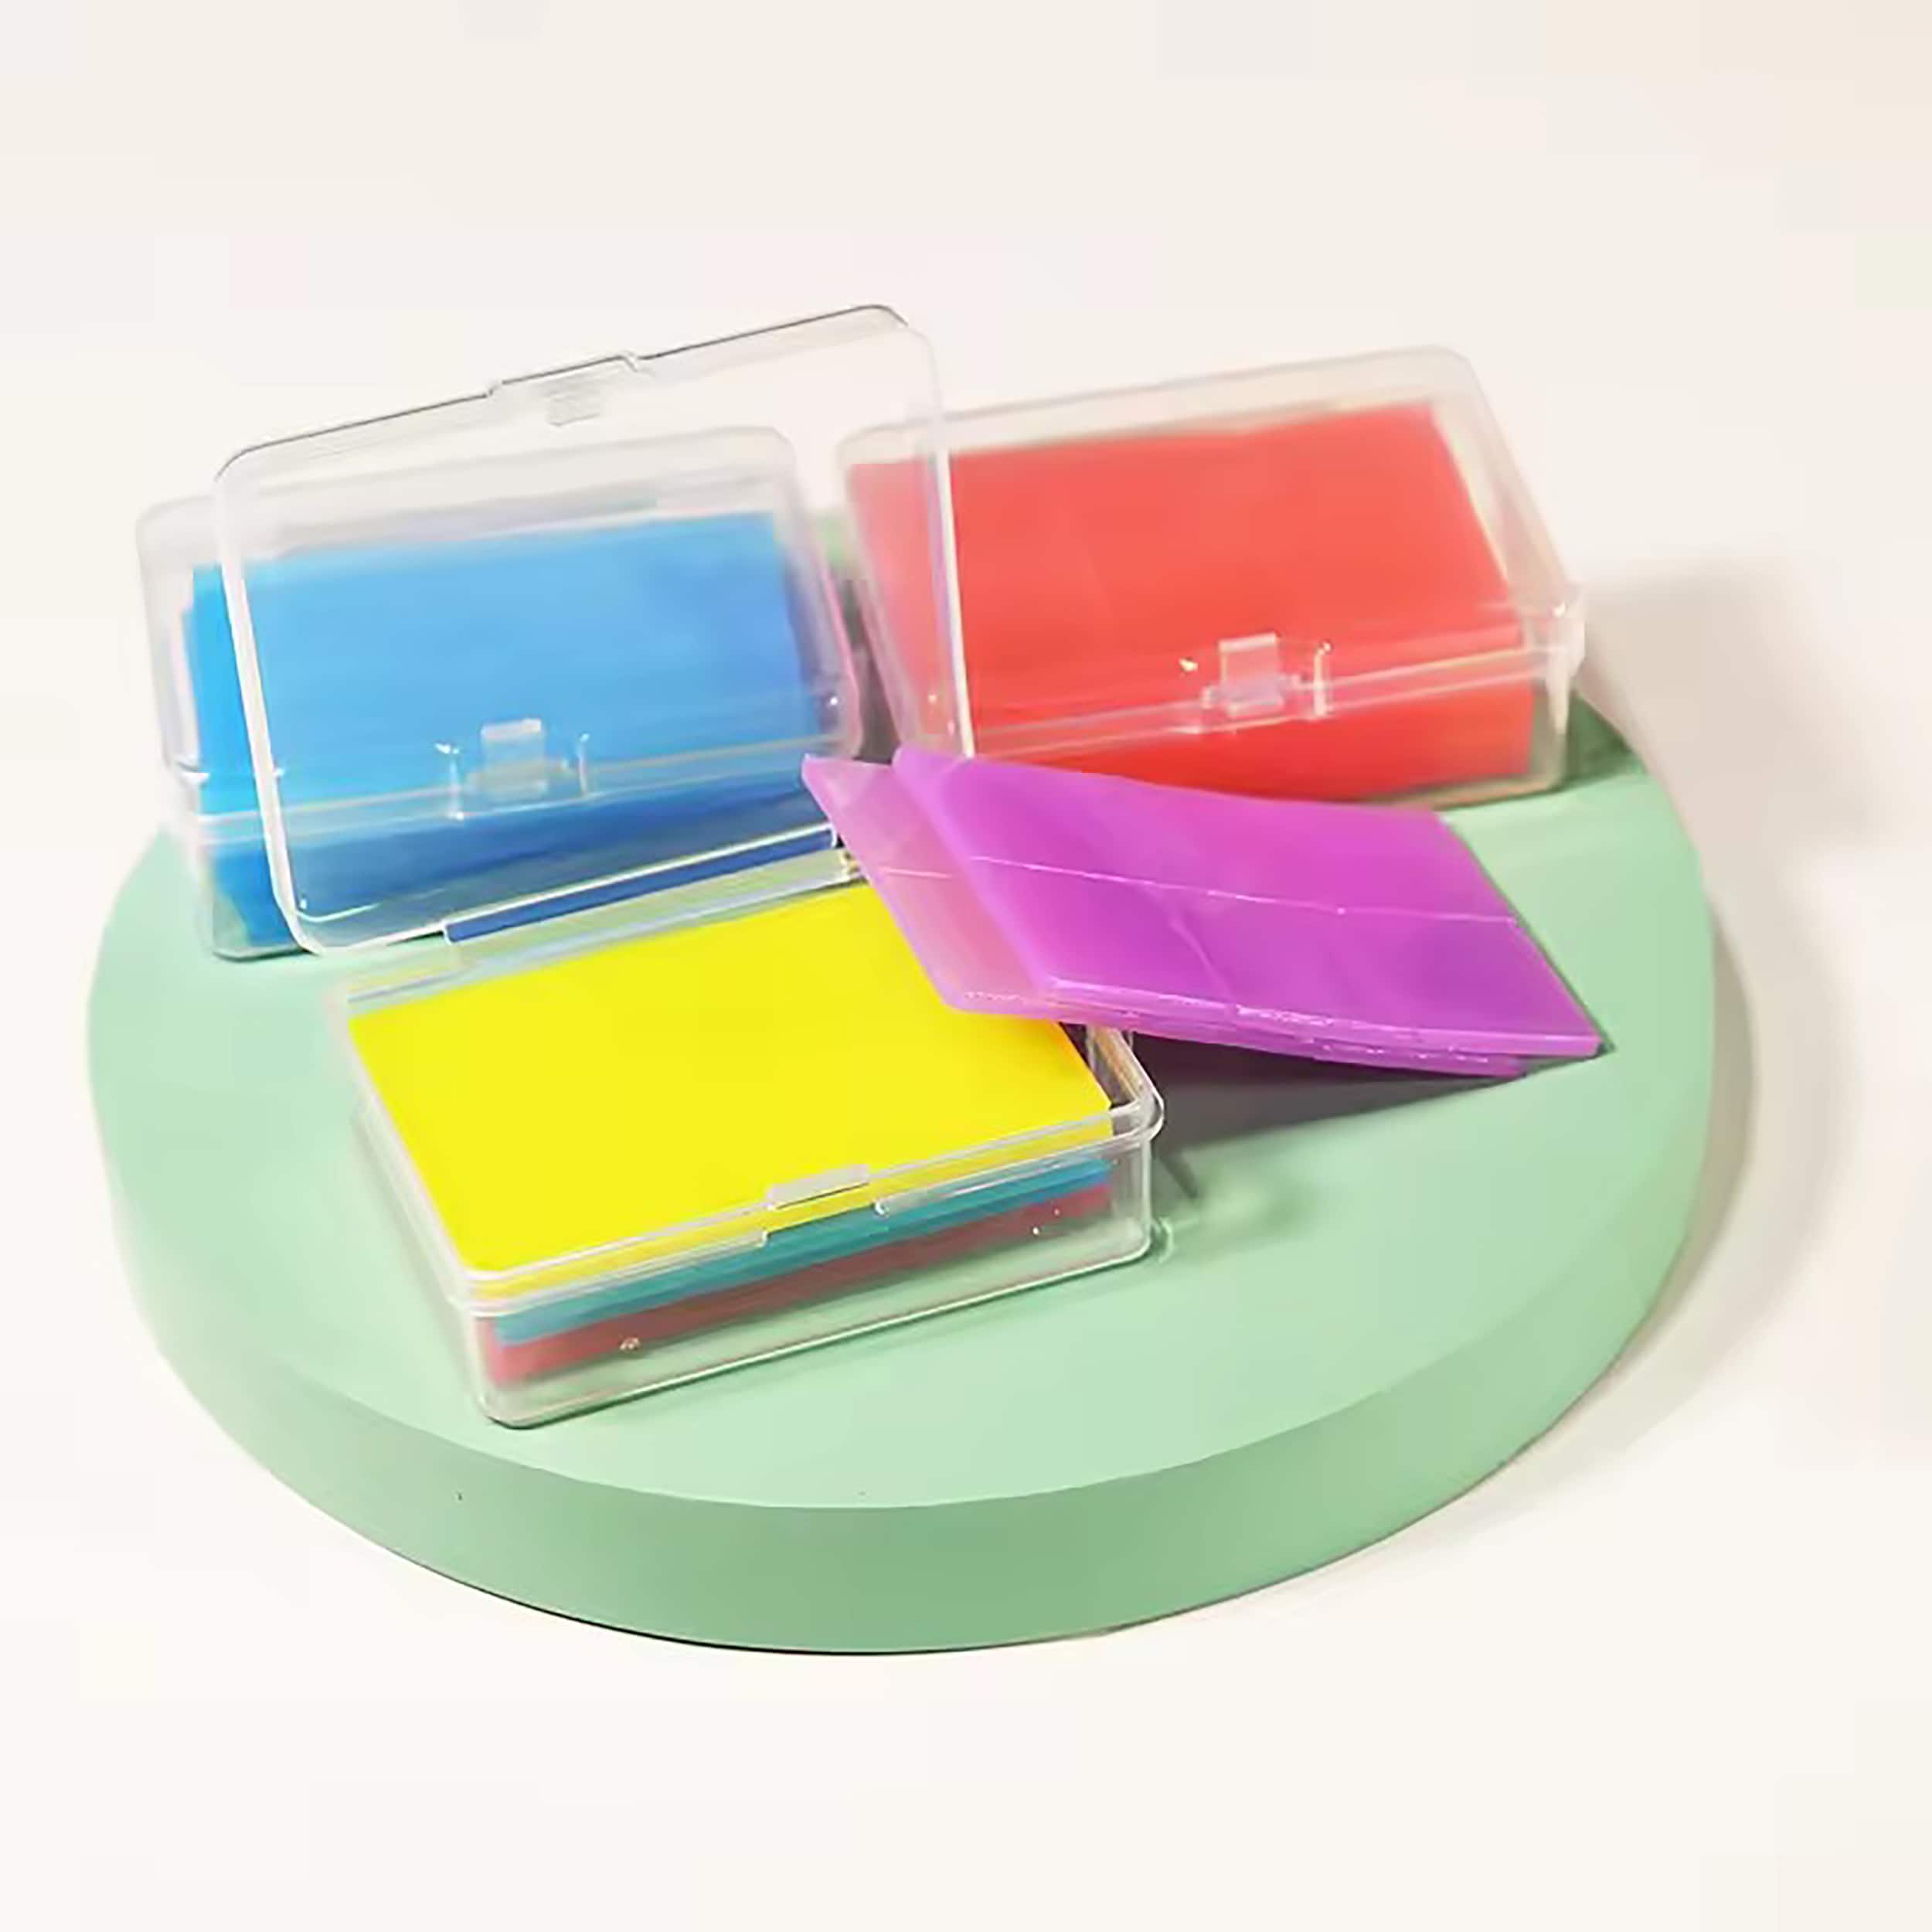 Sparkly Selections Multicolored Diamond Painting Square Wax Set